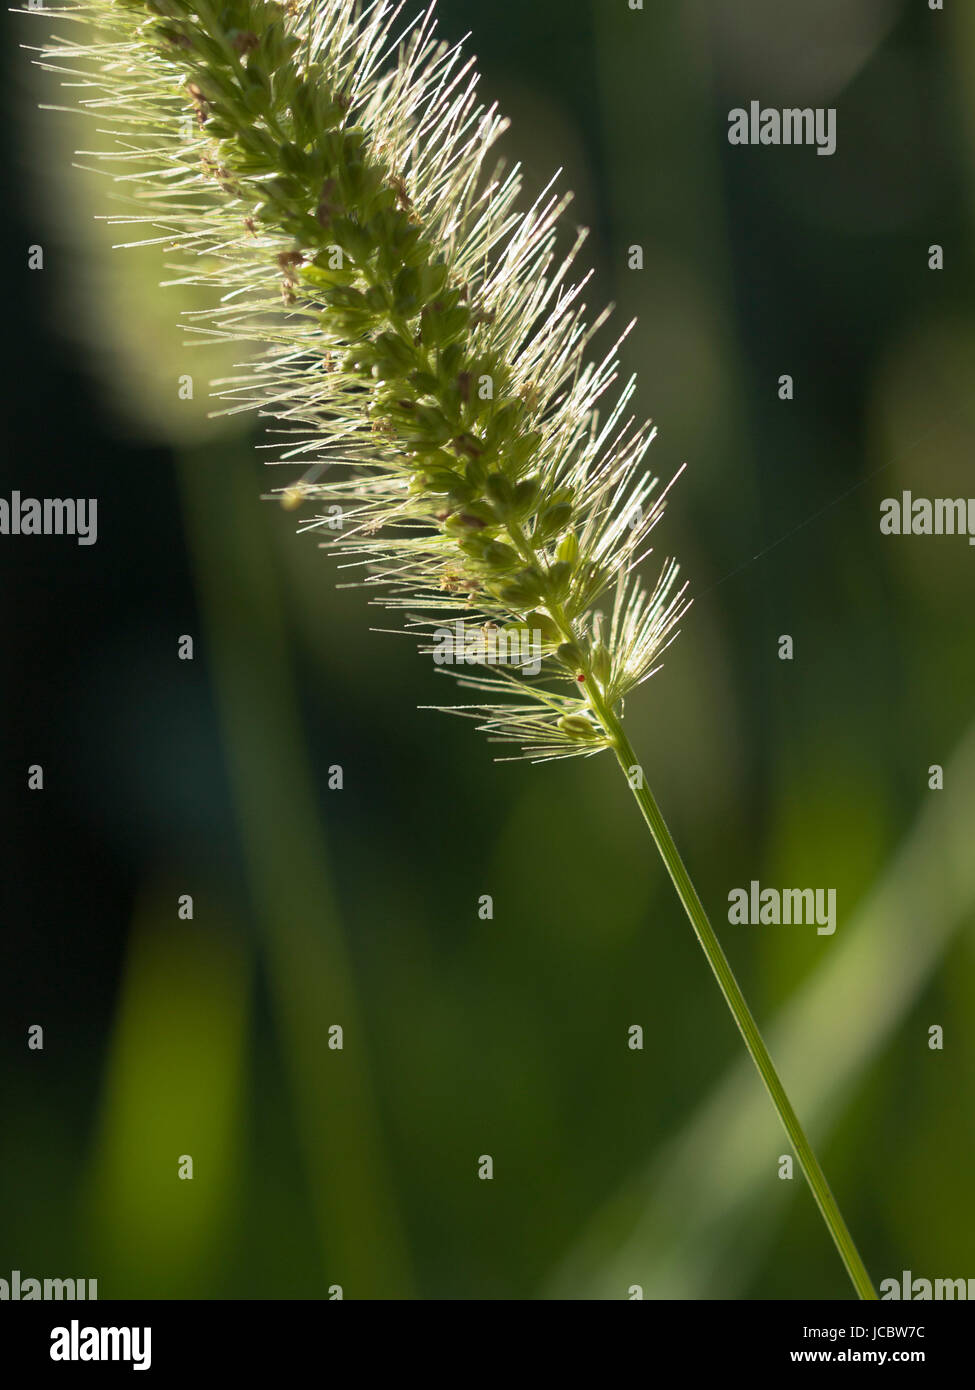 Macro image of a Green Foxtail, or Green Bristle grass (Setaria pumila) inflorescence. Stock Photo